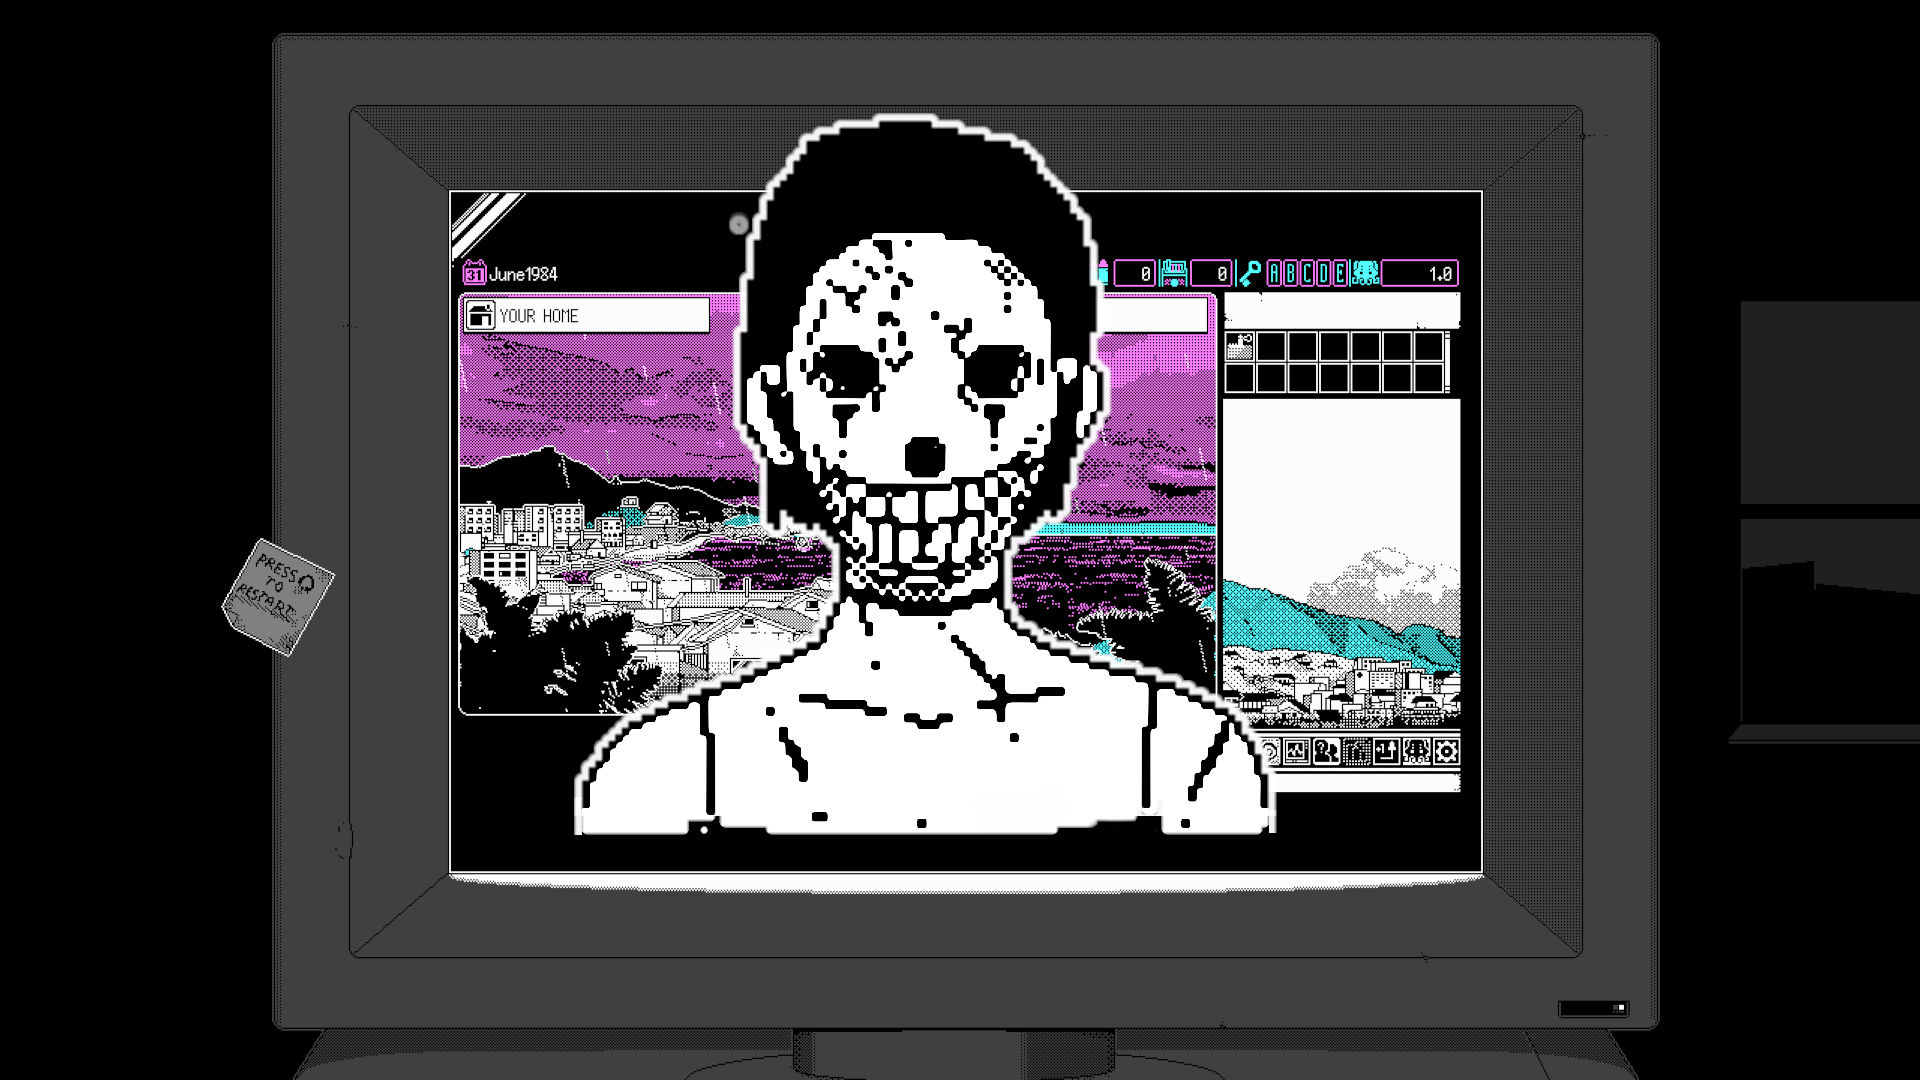 World of Horror, a creepy 1-bit style horror RPG, will release next month